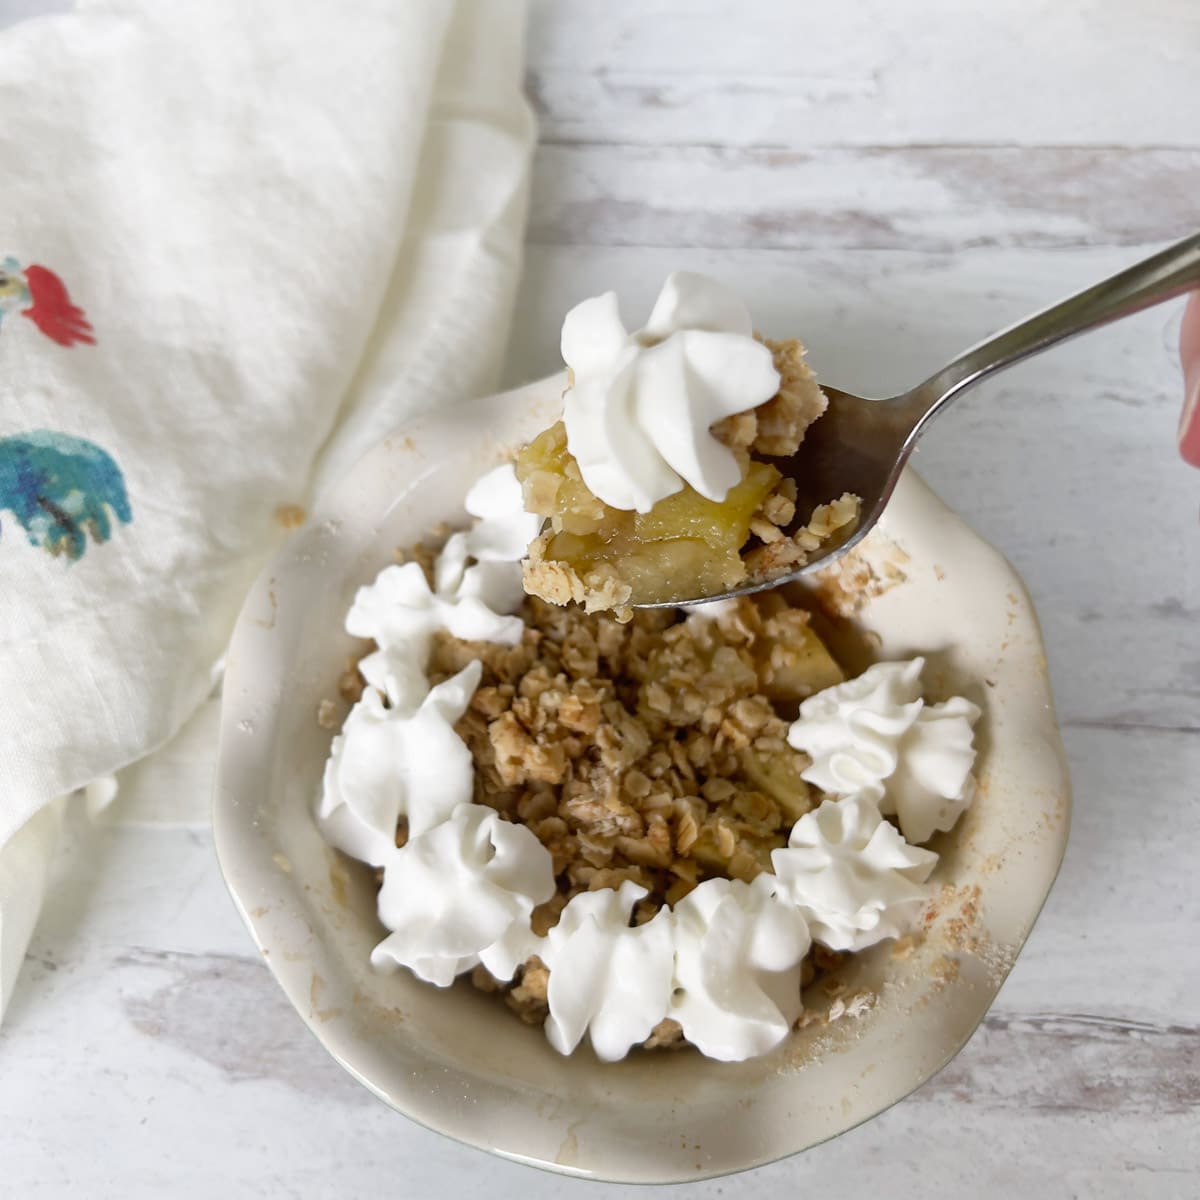 Apple Crisp topped with whipped cream in a scalloped mini pie dish.